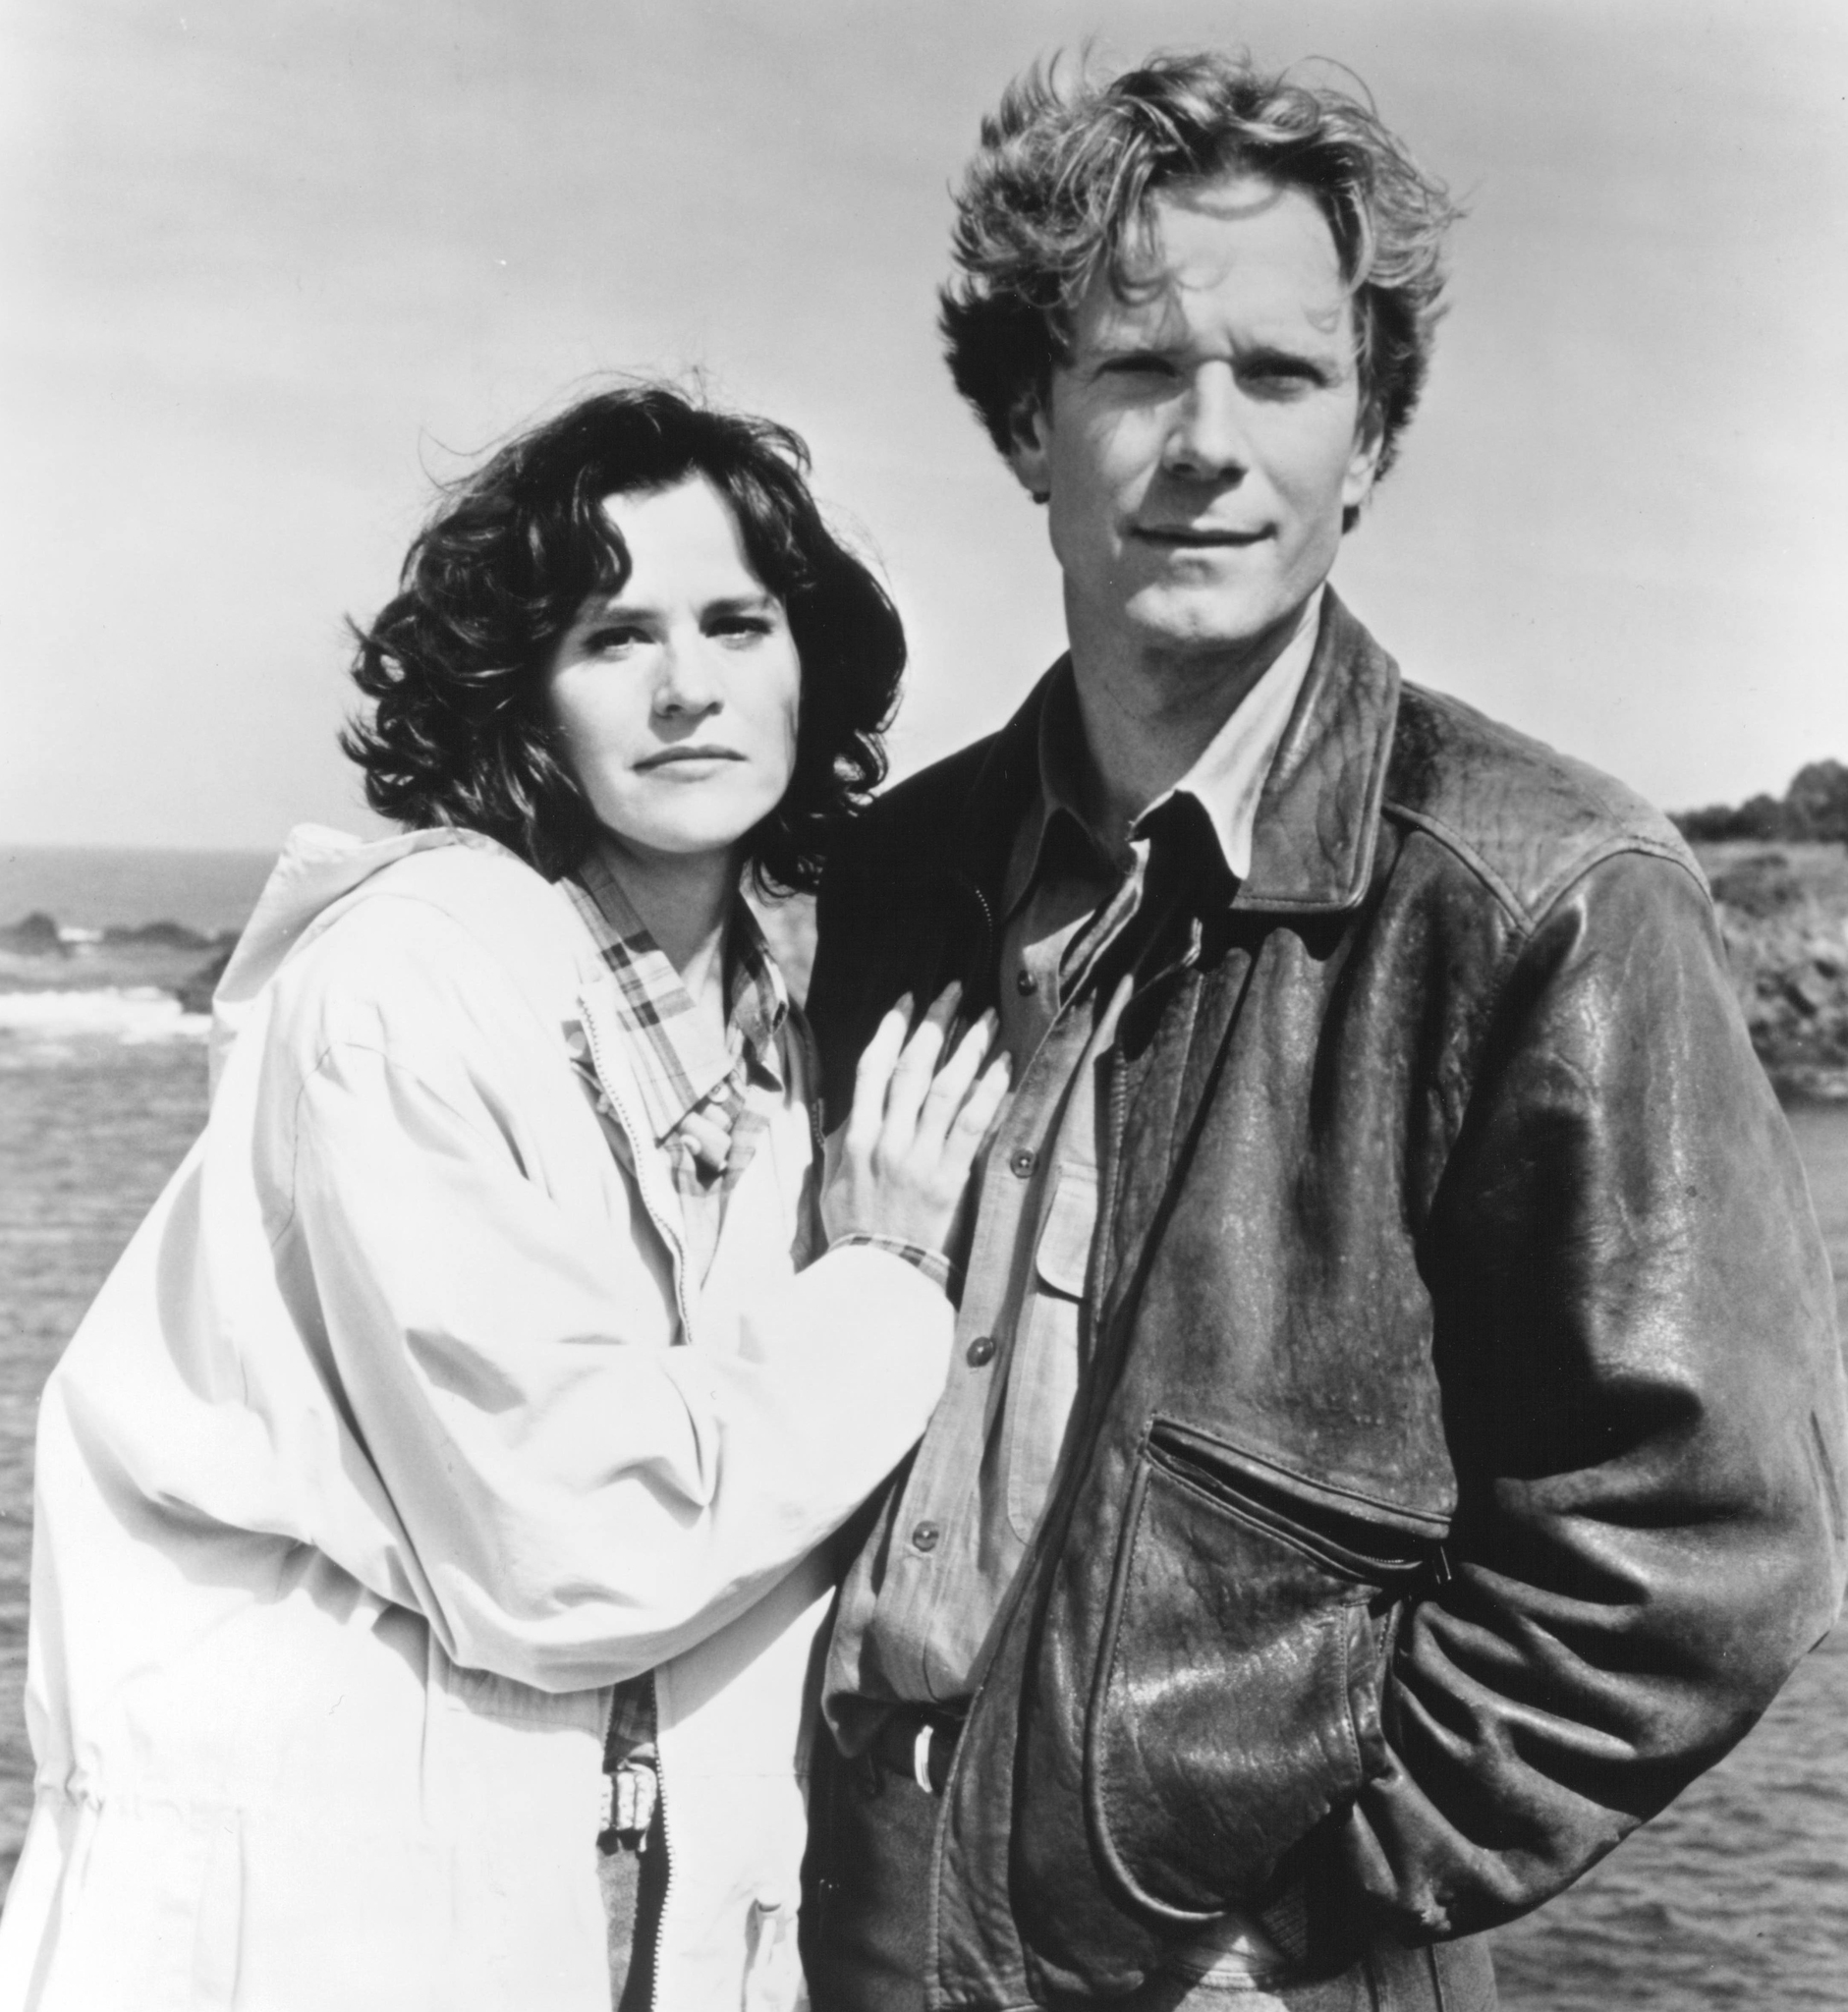 Still of Ally Sheedy and William R. Moses in The Haunting of Seacliff Inn (1994)